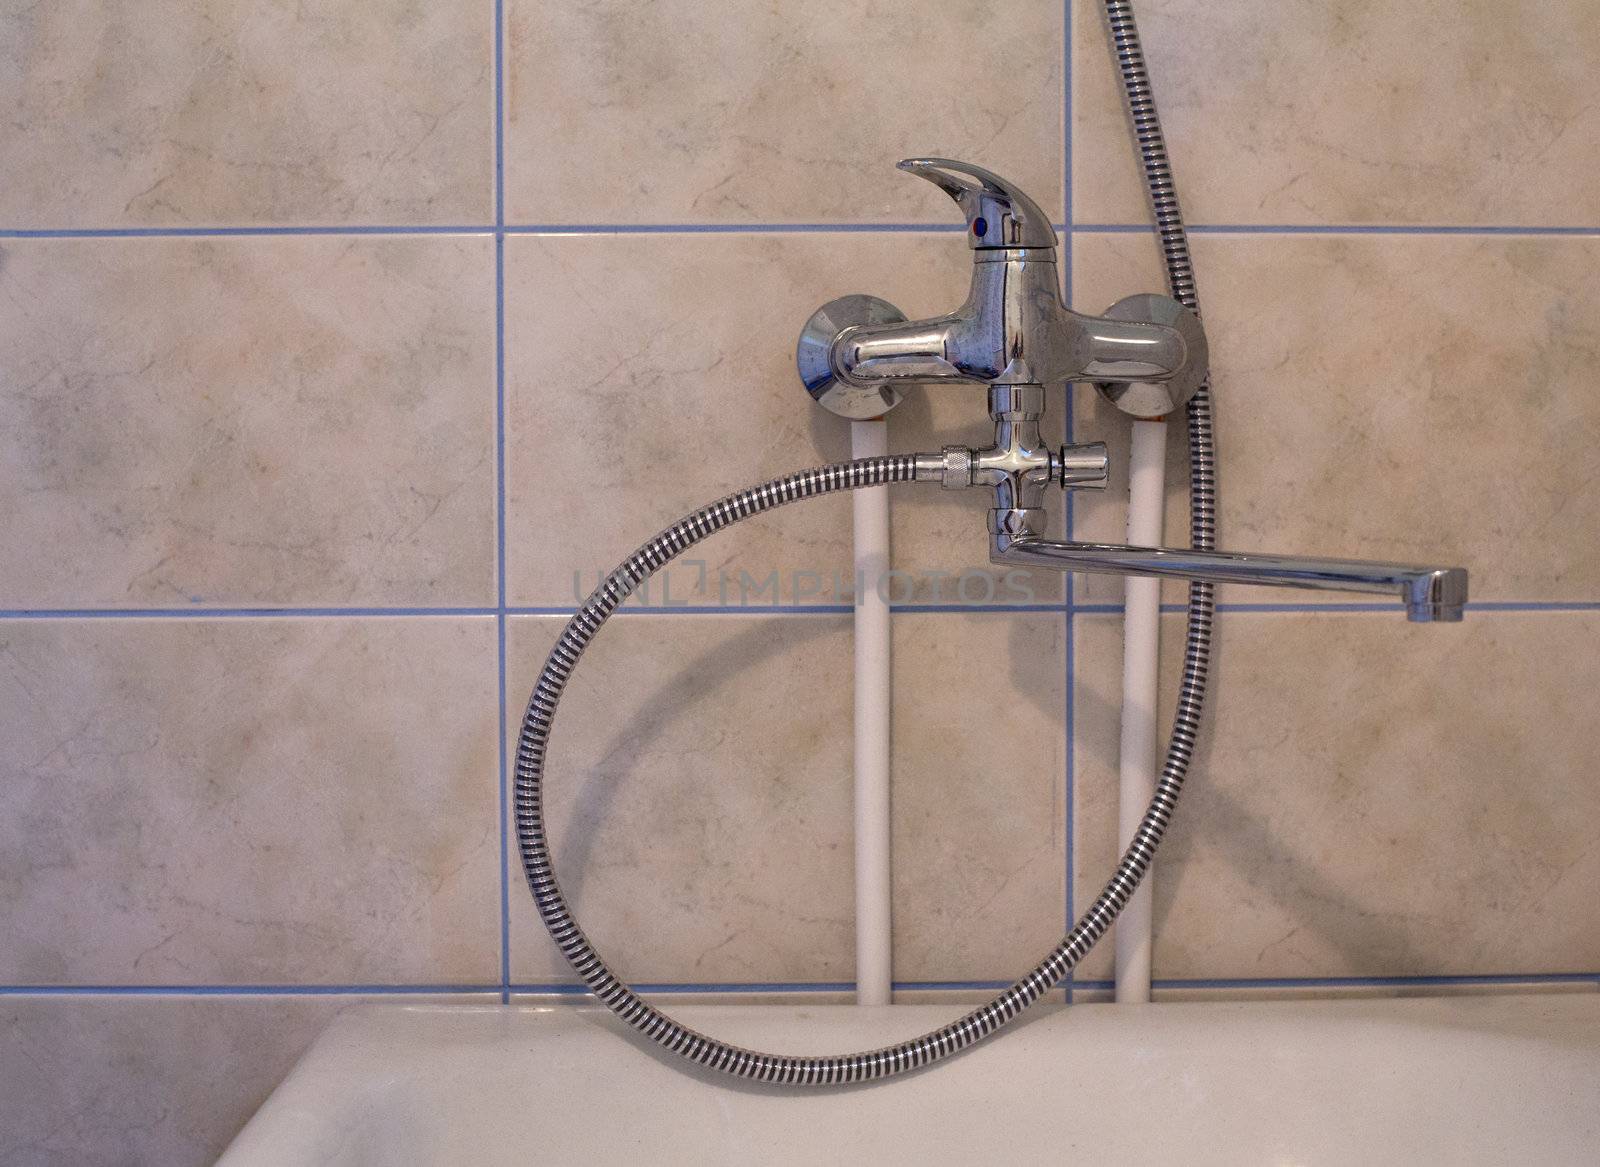 Crome shower faucet turned to right side by vetdoctor